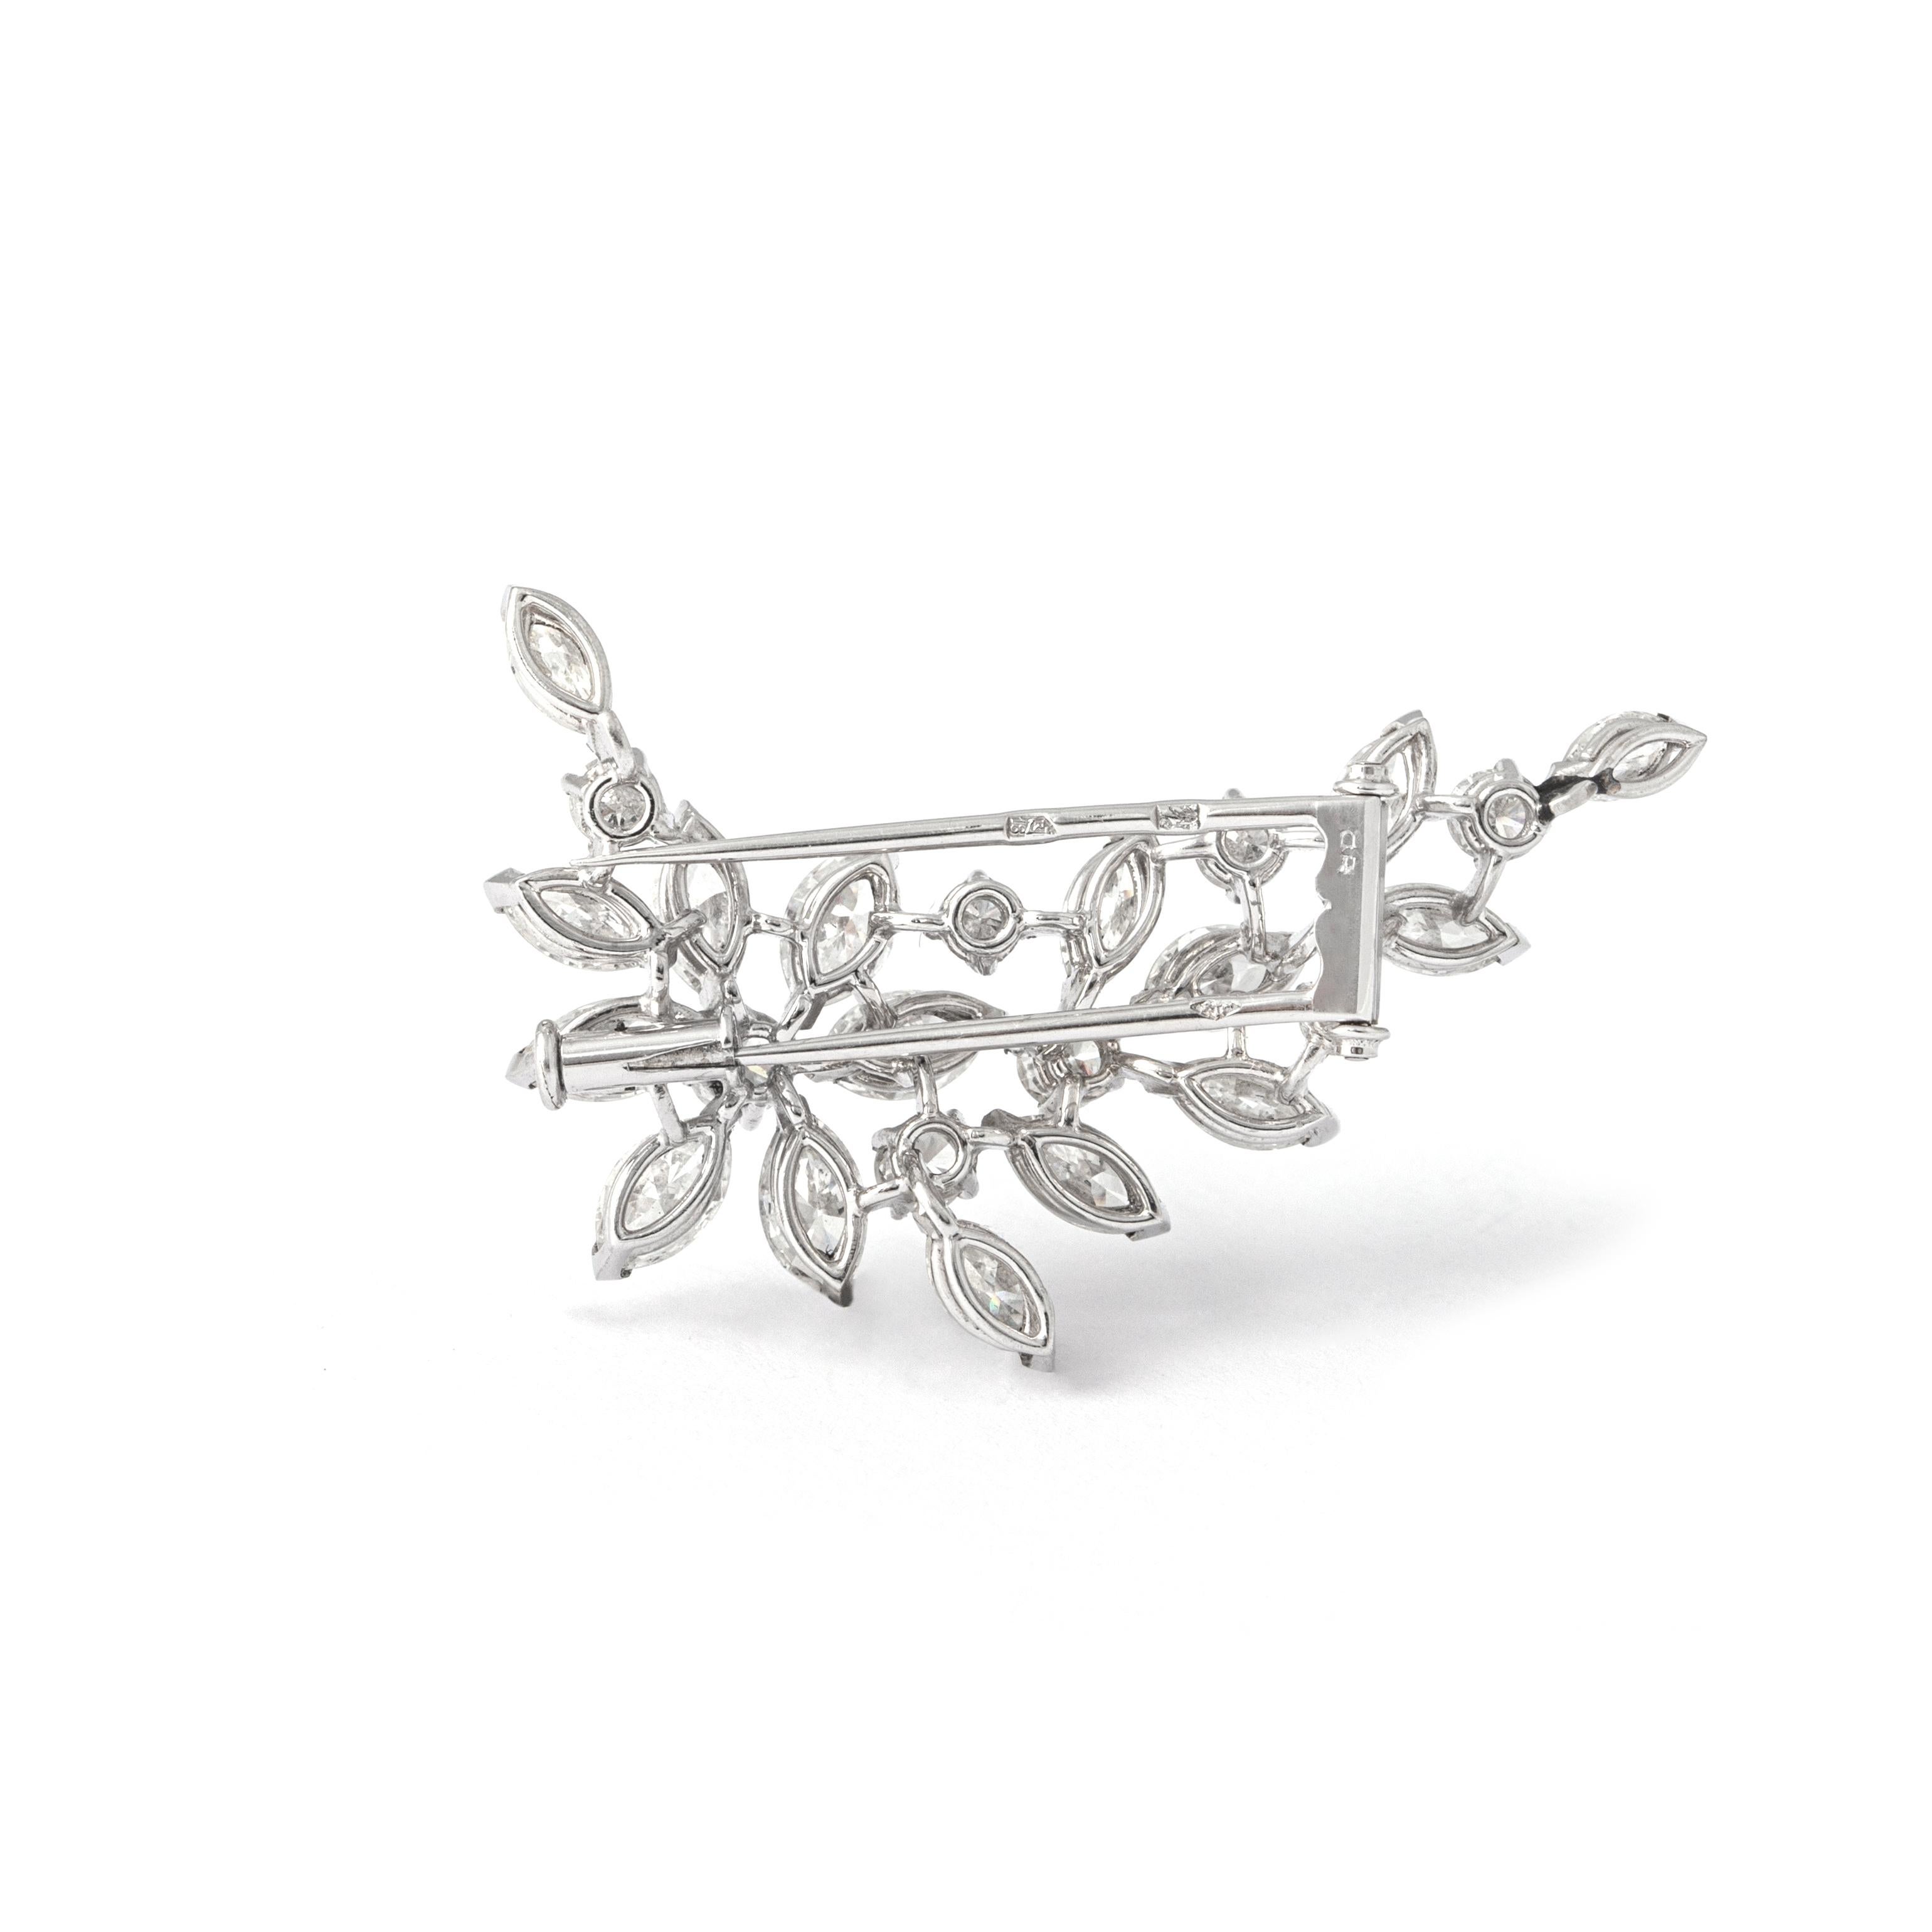 Indulge in the timeless allure of our Diamond 18K White Gold Brooch. 
A masterpiece of sophistication and brilliance.

This exquisite brooch boasts a harmonious blend of diamonds, with 8 round-cut diamonds weighing approximately 0.95 carats in